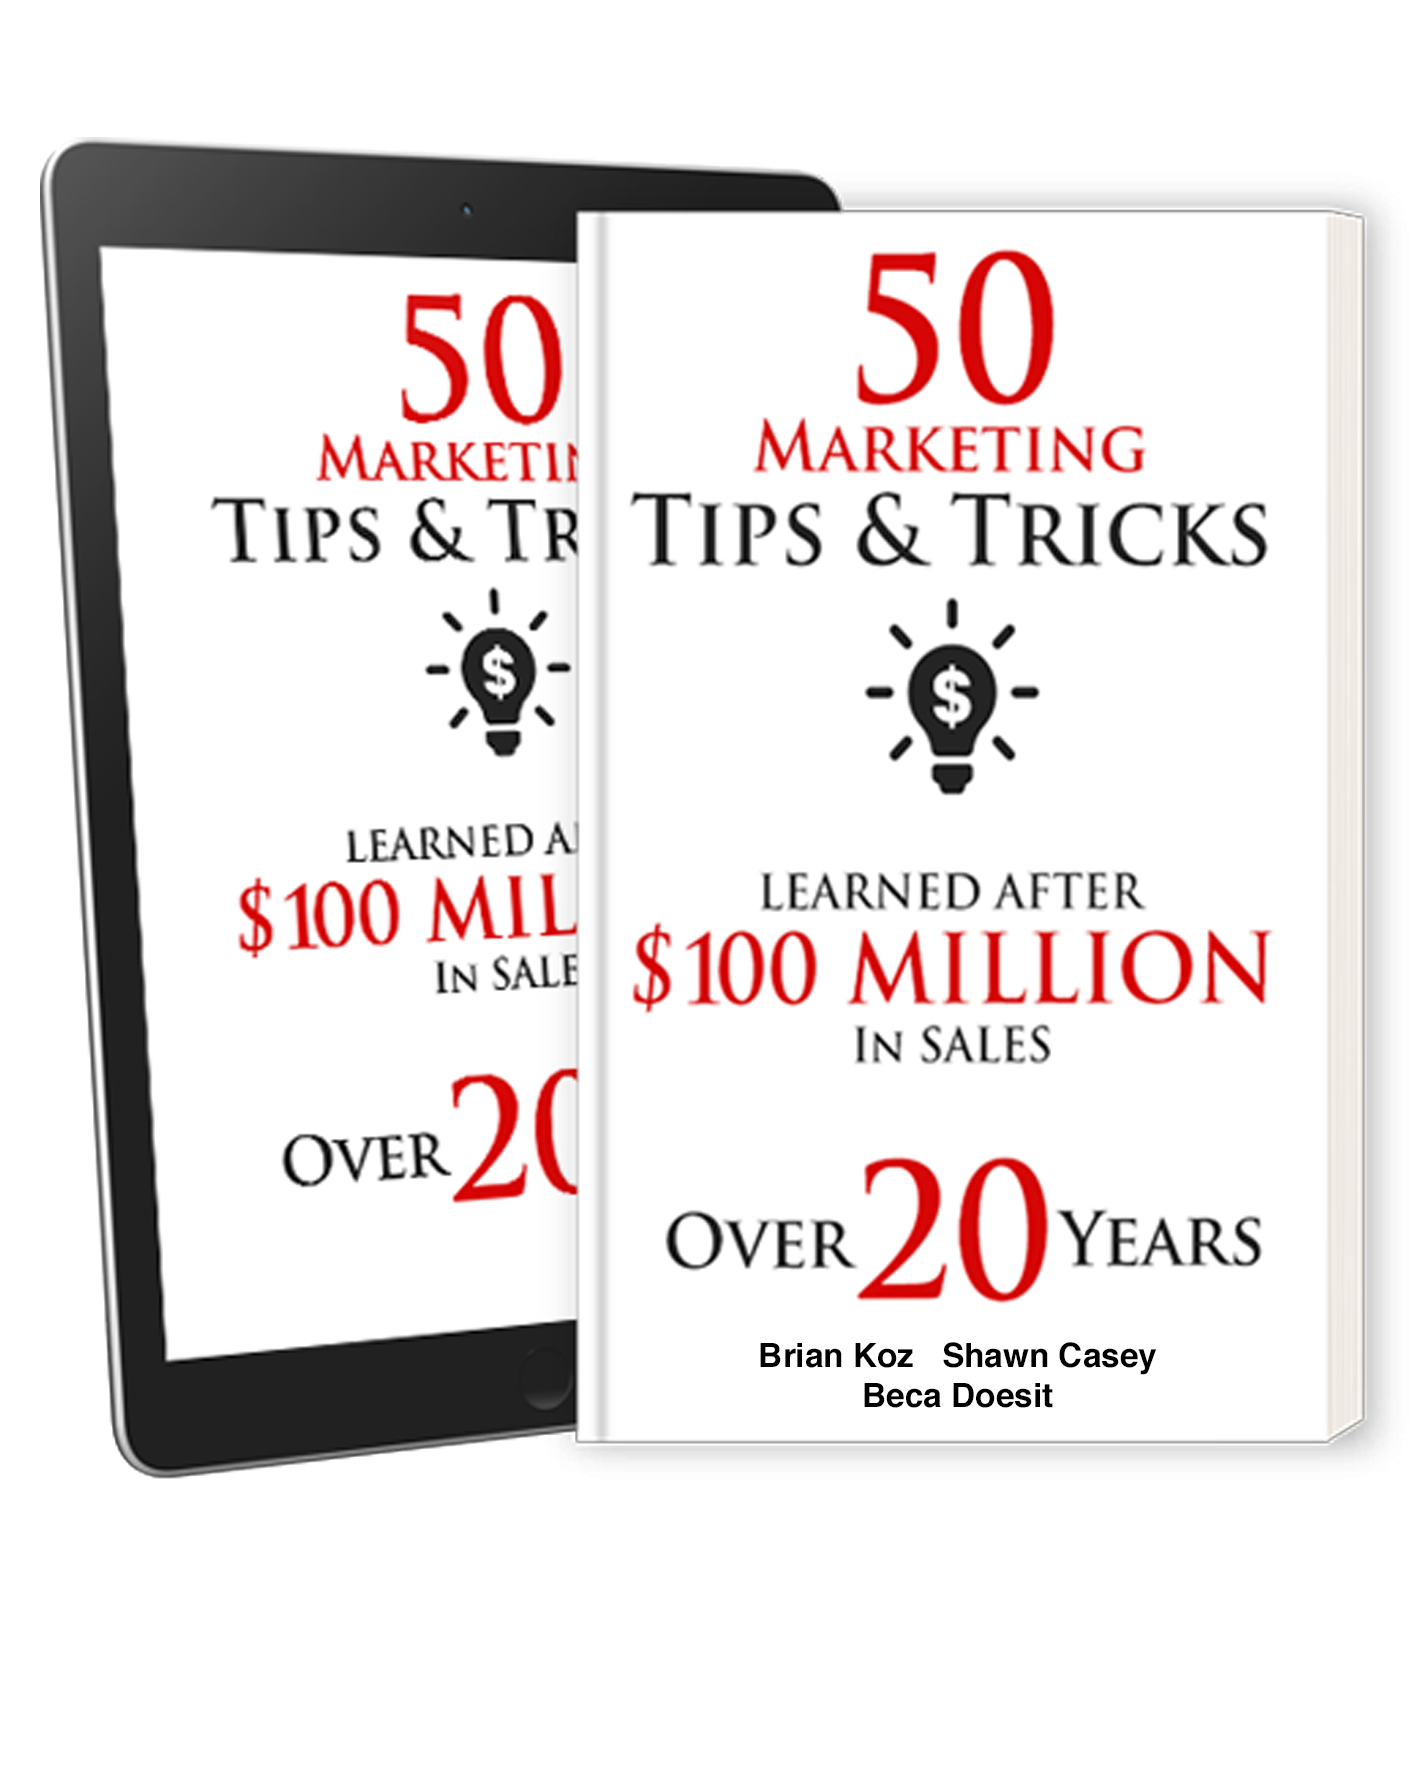 FREE Ebook on Marketing Tips and Tricks